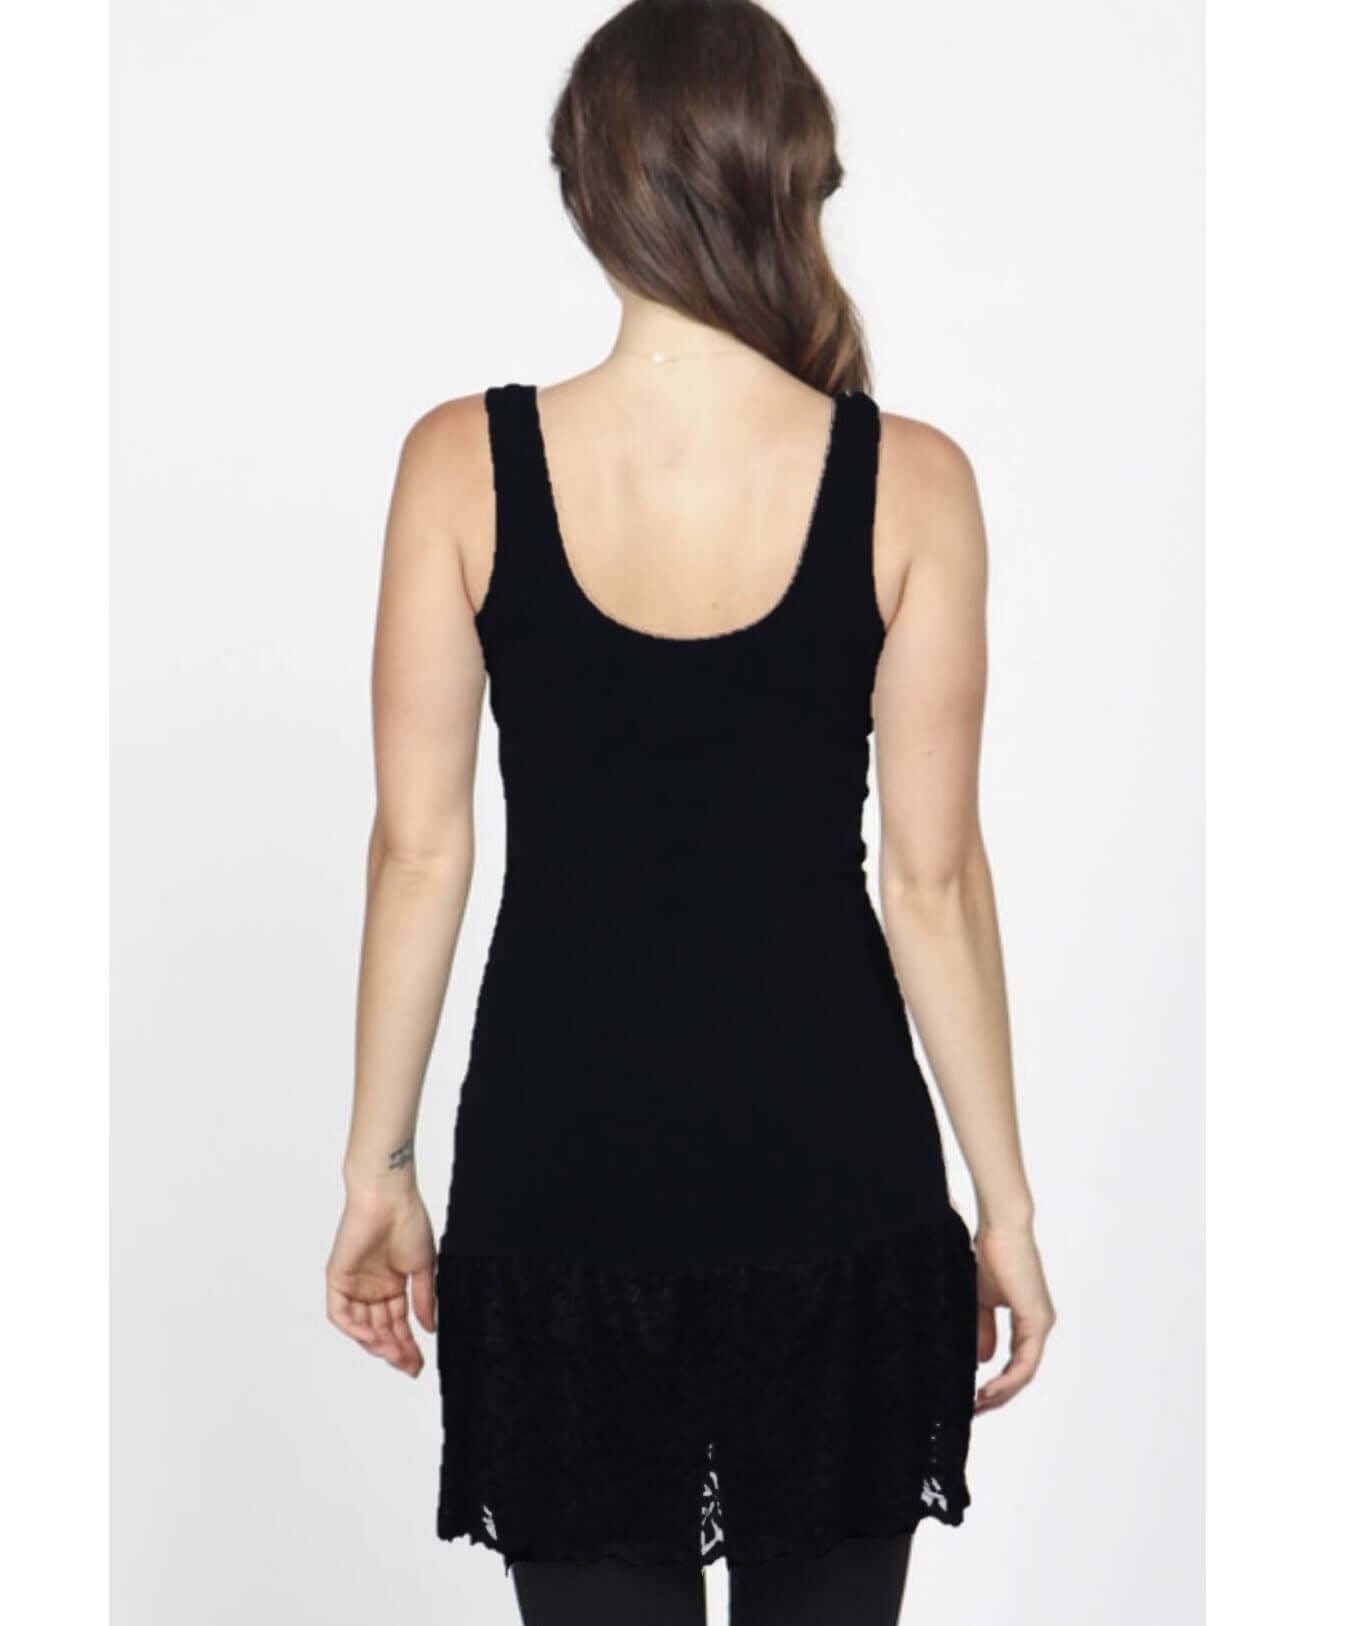 Reversible Tunic Length Black Tank Top with Lace Trim Made by M. Rena | Proudly Made in the USA | Women's Made in America Boutique